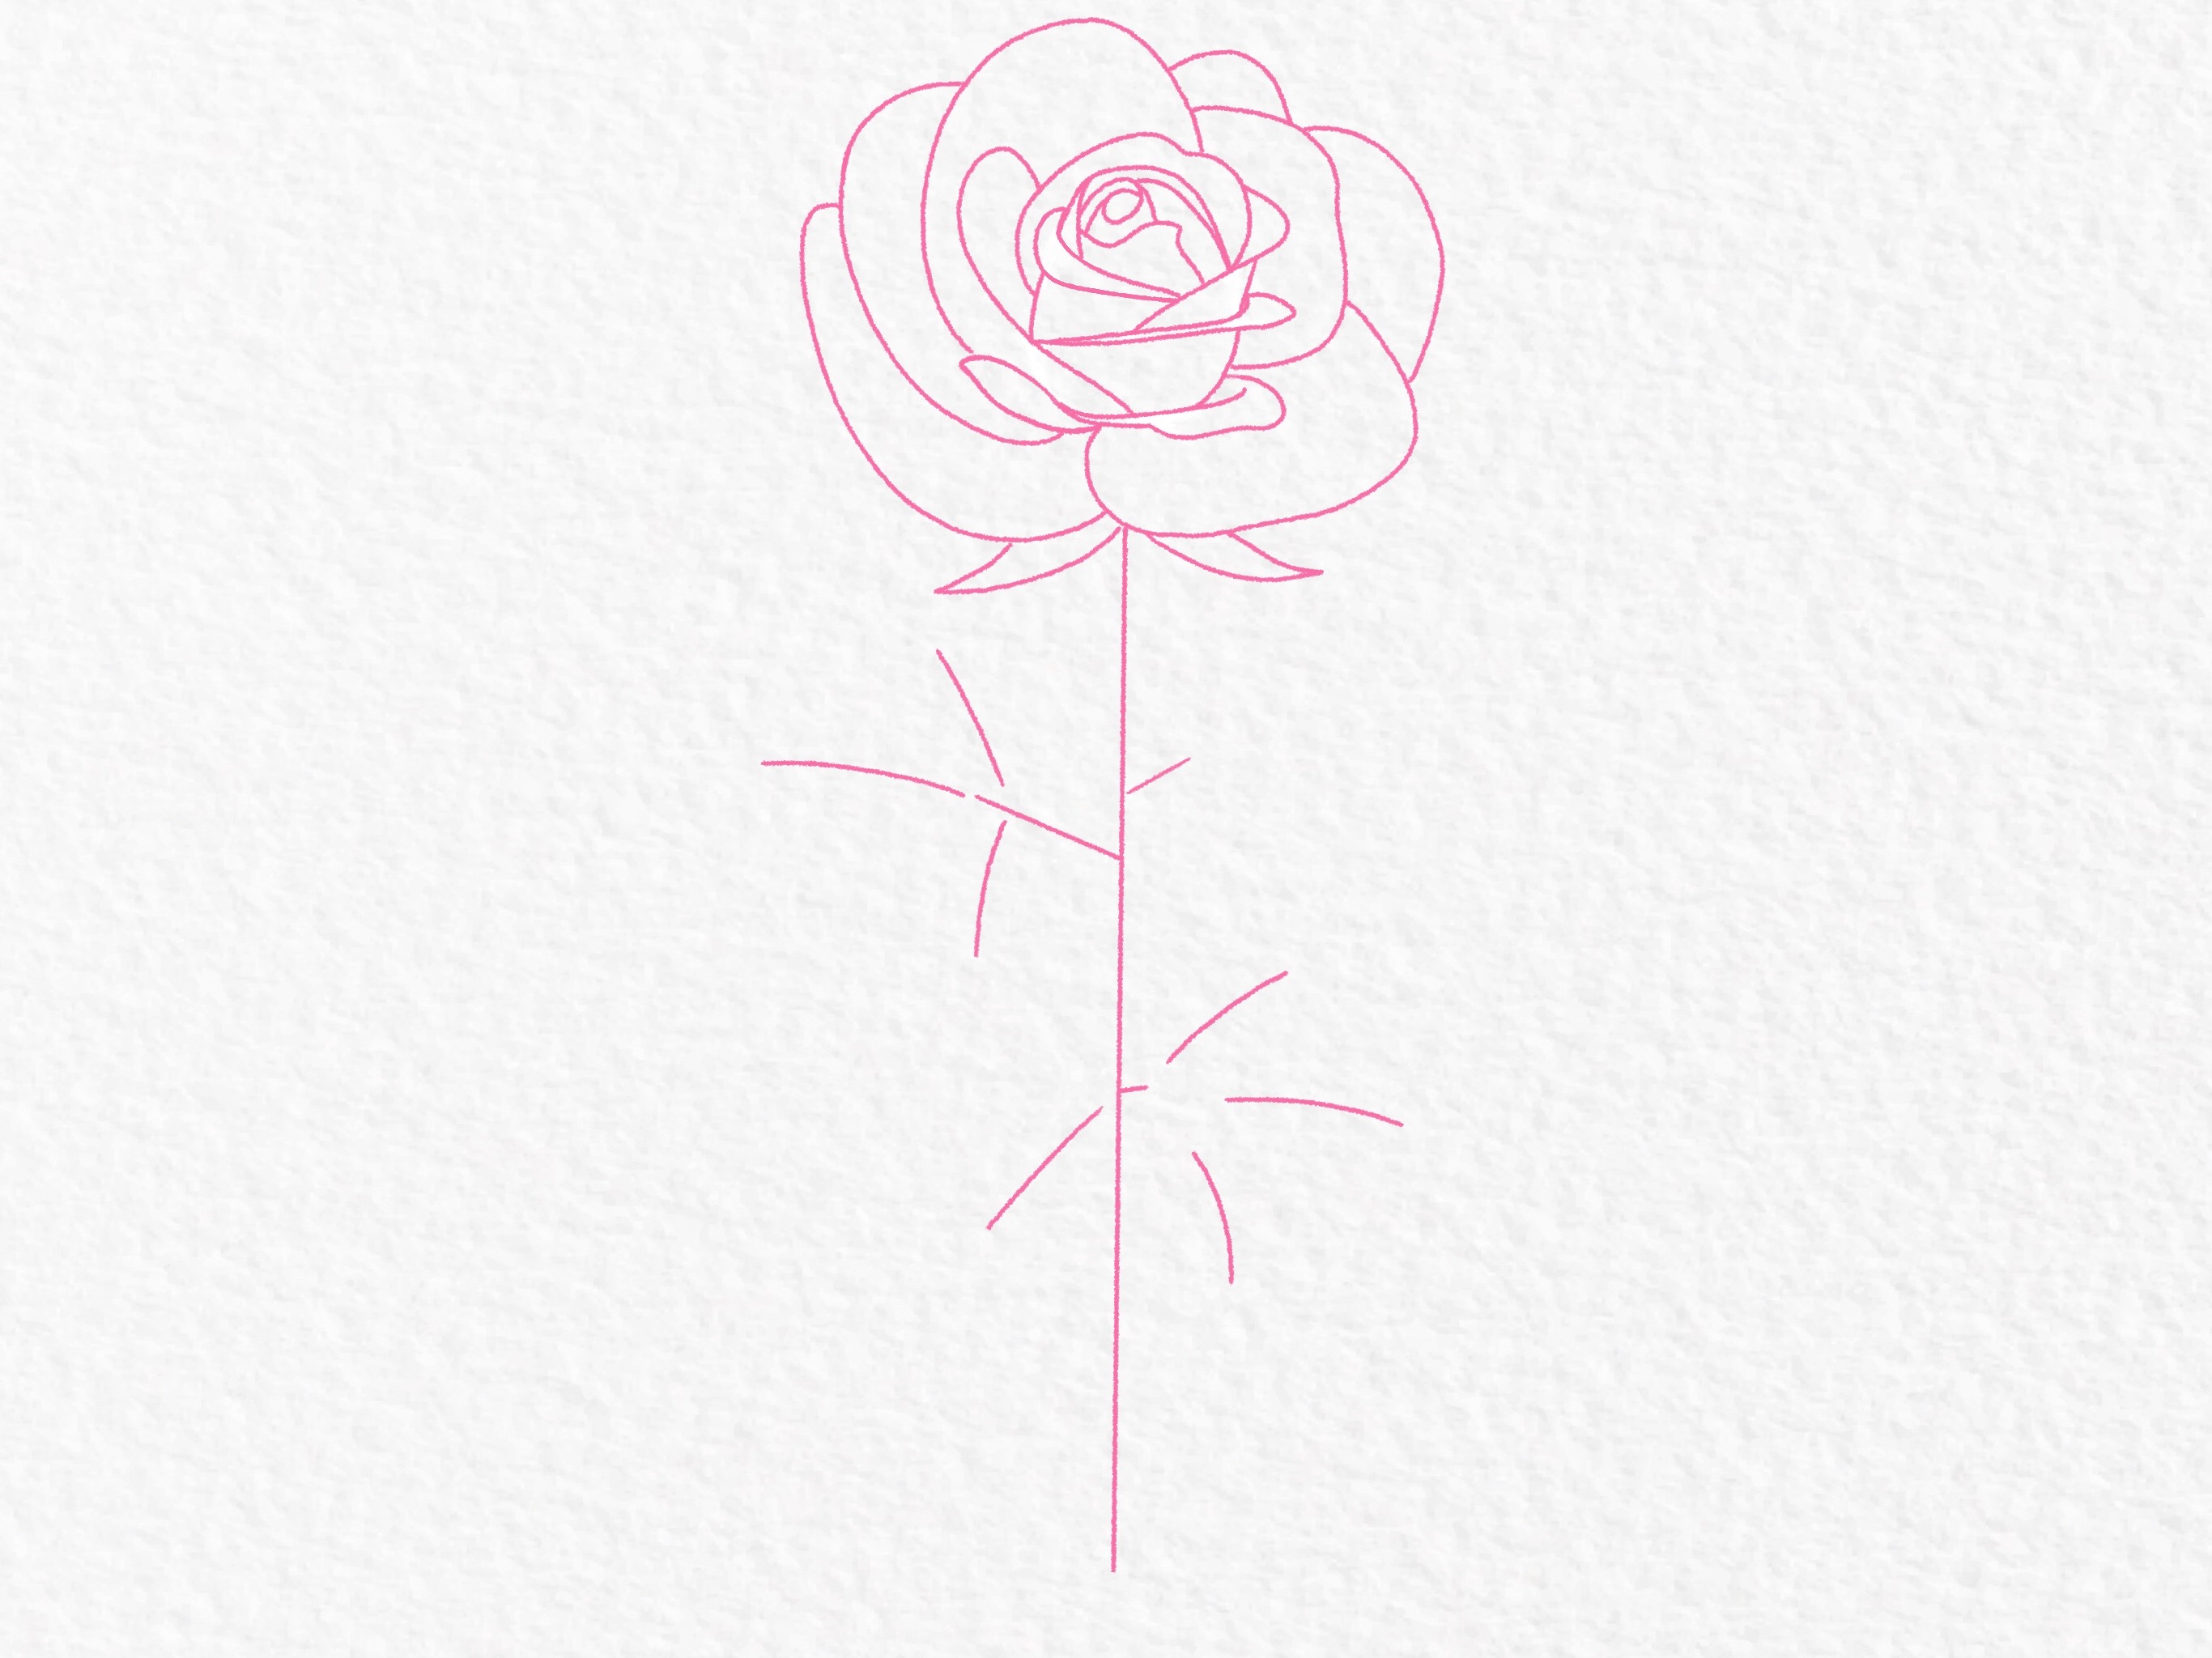 How to draw a rose, step by step drawing tutorial - step 22